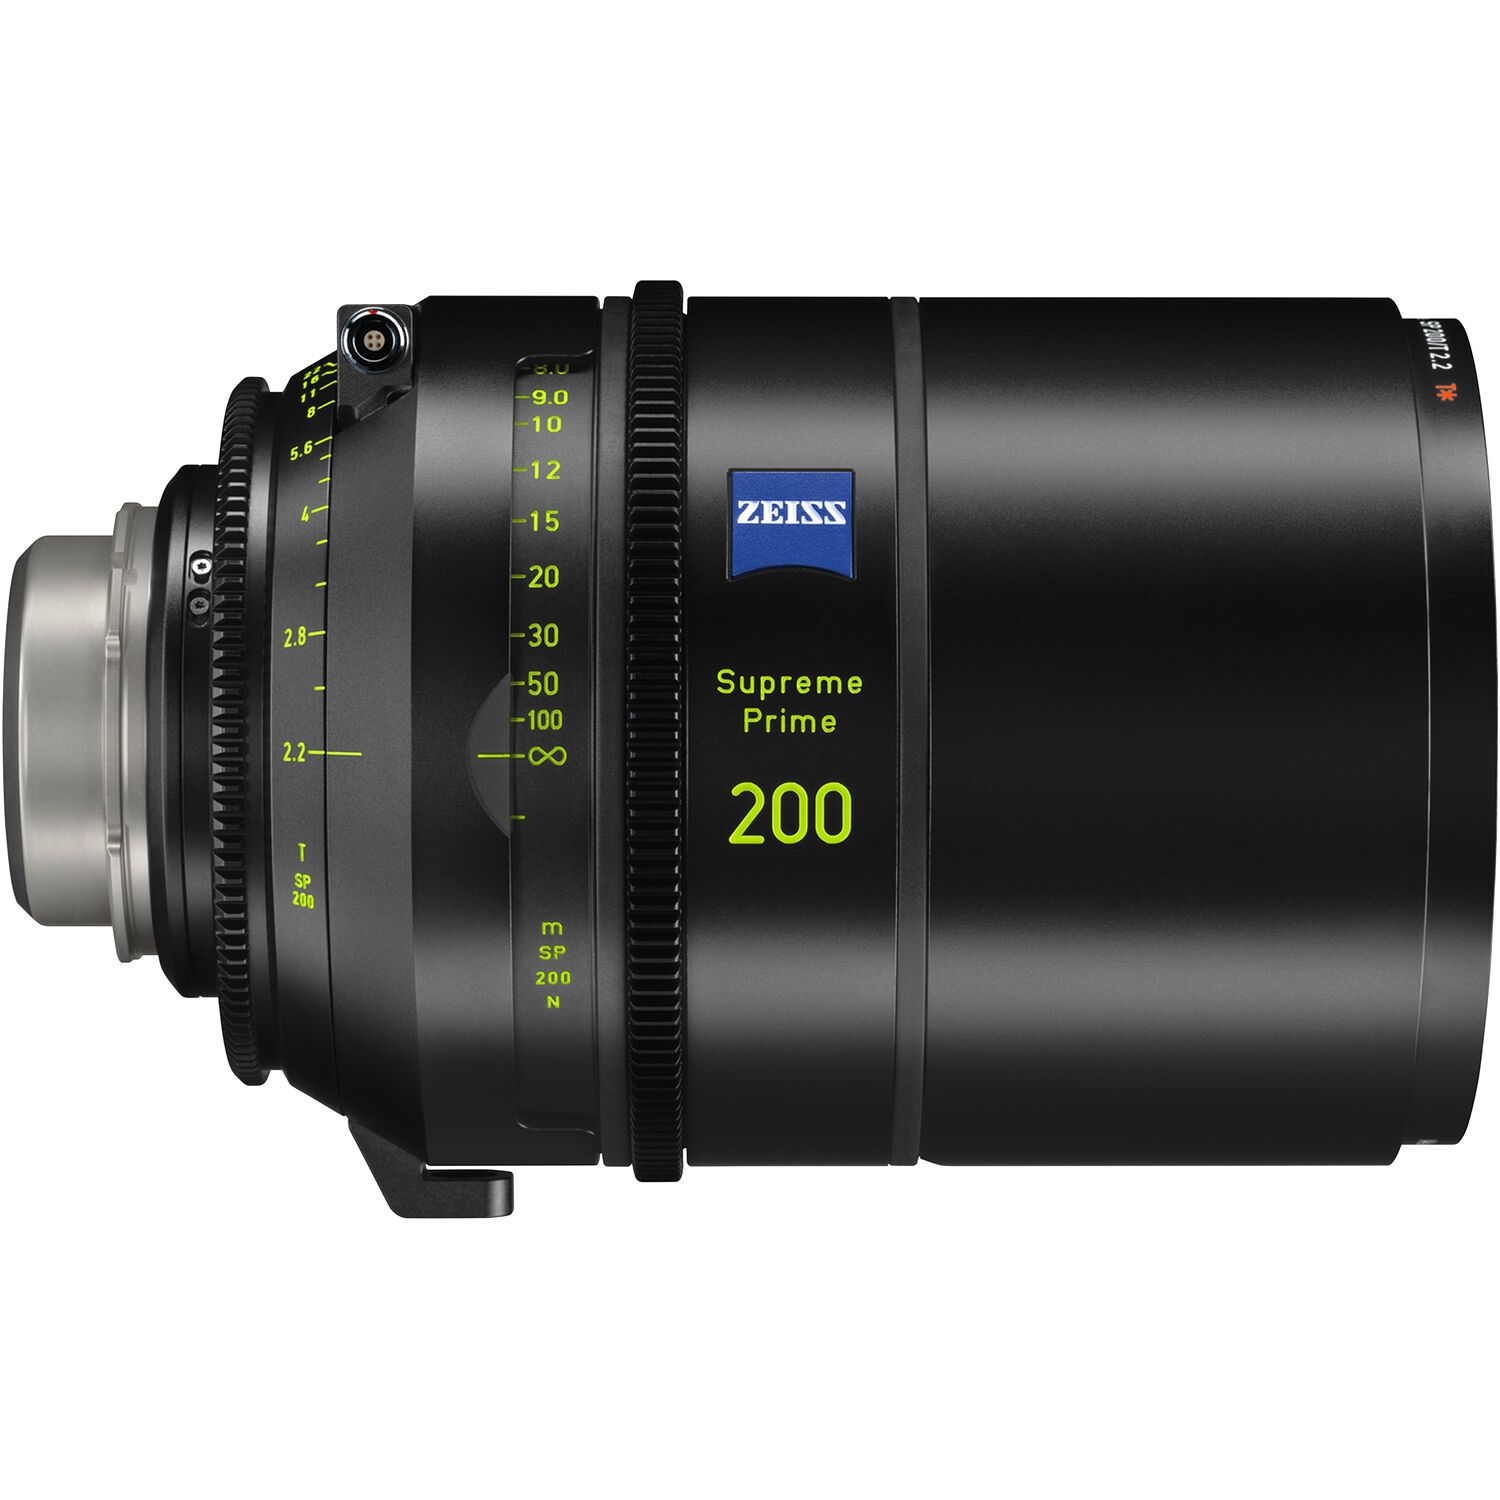 ZEISS - Supreme Prime 200mm T2.2 PL (Feet)